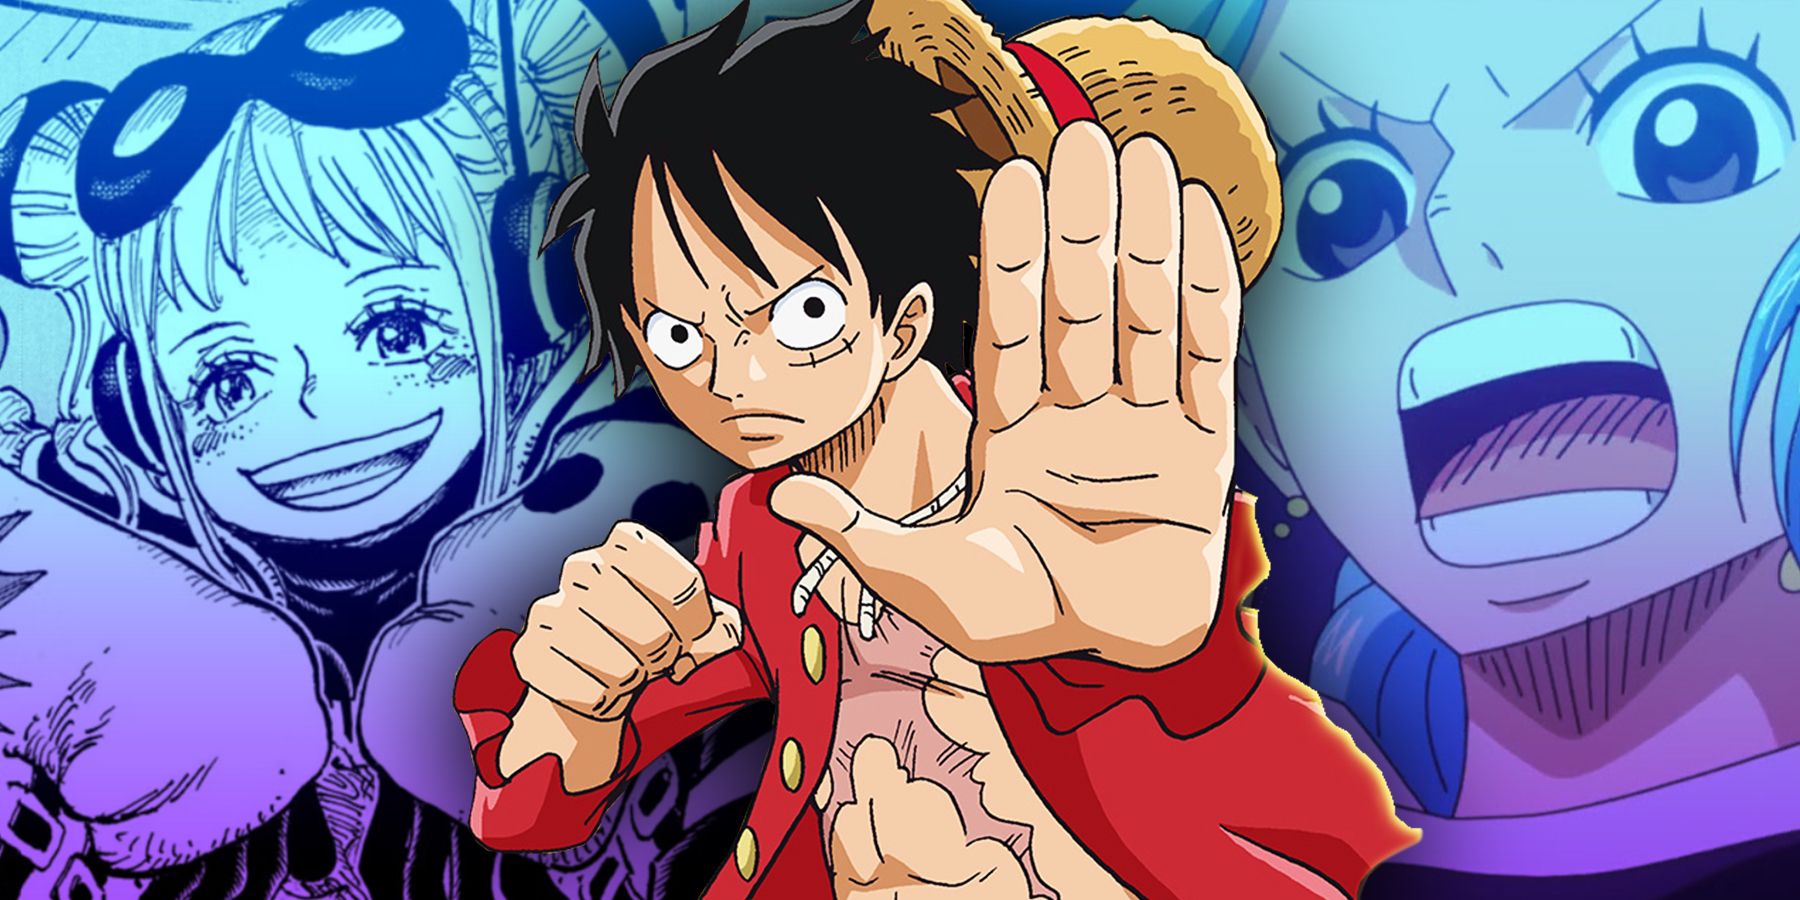 Learn How to Draw Luffy in Gear Second: A Step-by-Step Guide